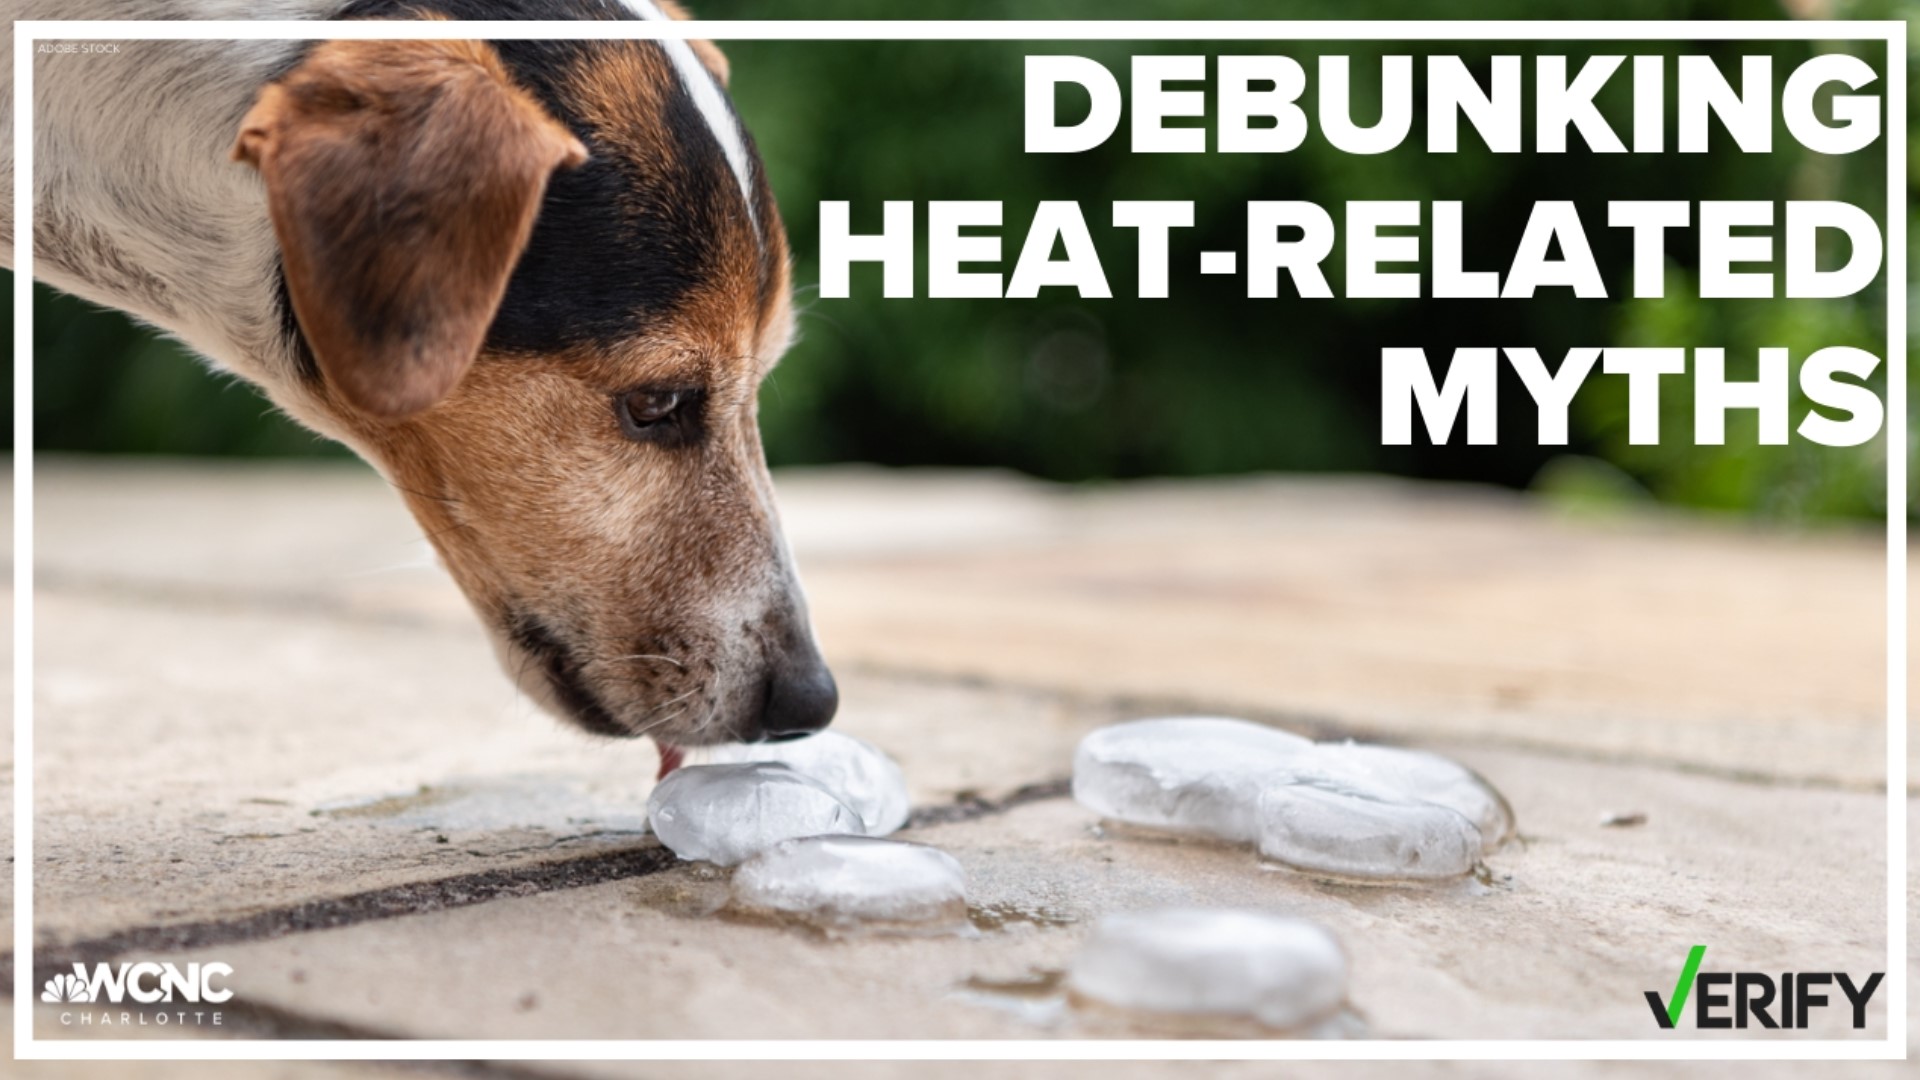 Ahead of more high temperatures for the Carolinas, the VERIFY team is looking into some heat-related claims.